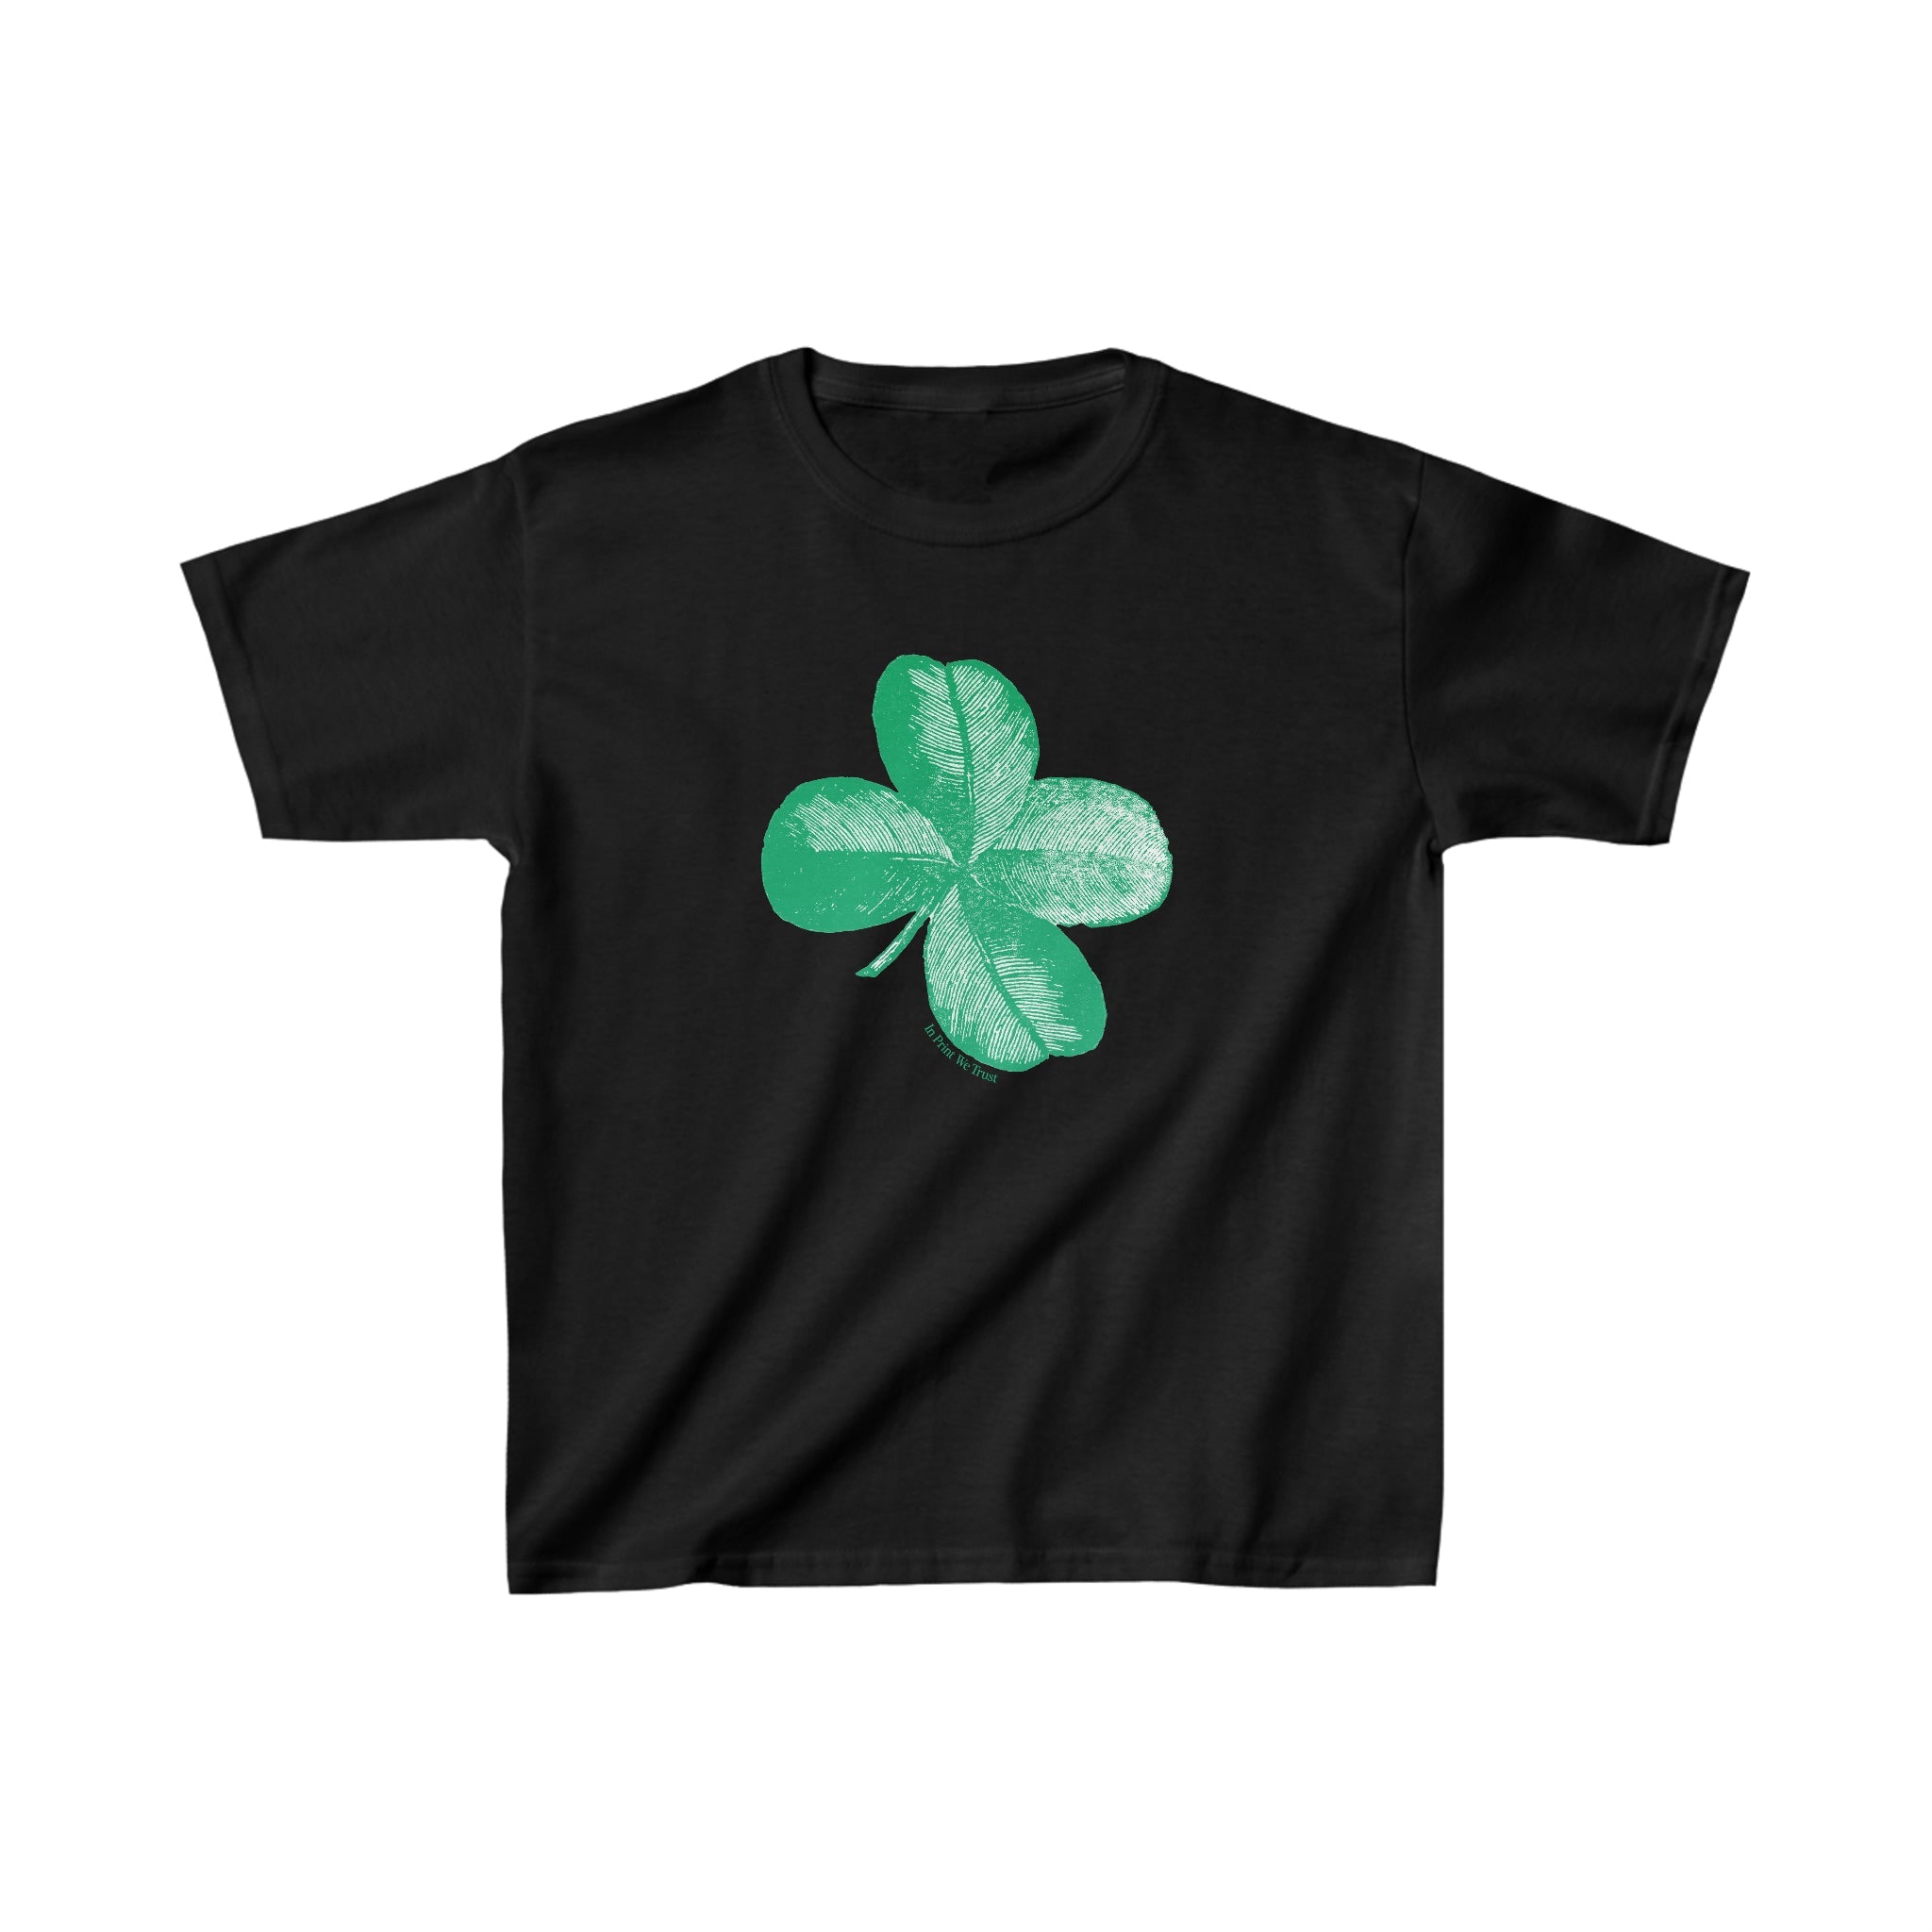 'Four-Leaf Clover' baby tee - In Print We Trust